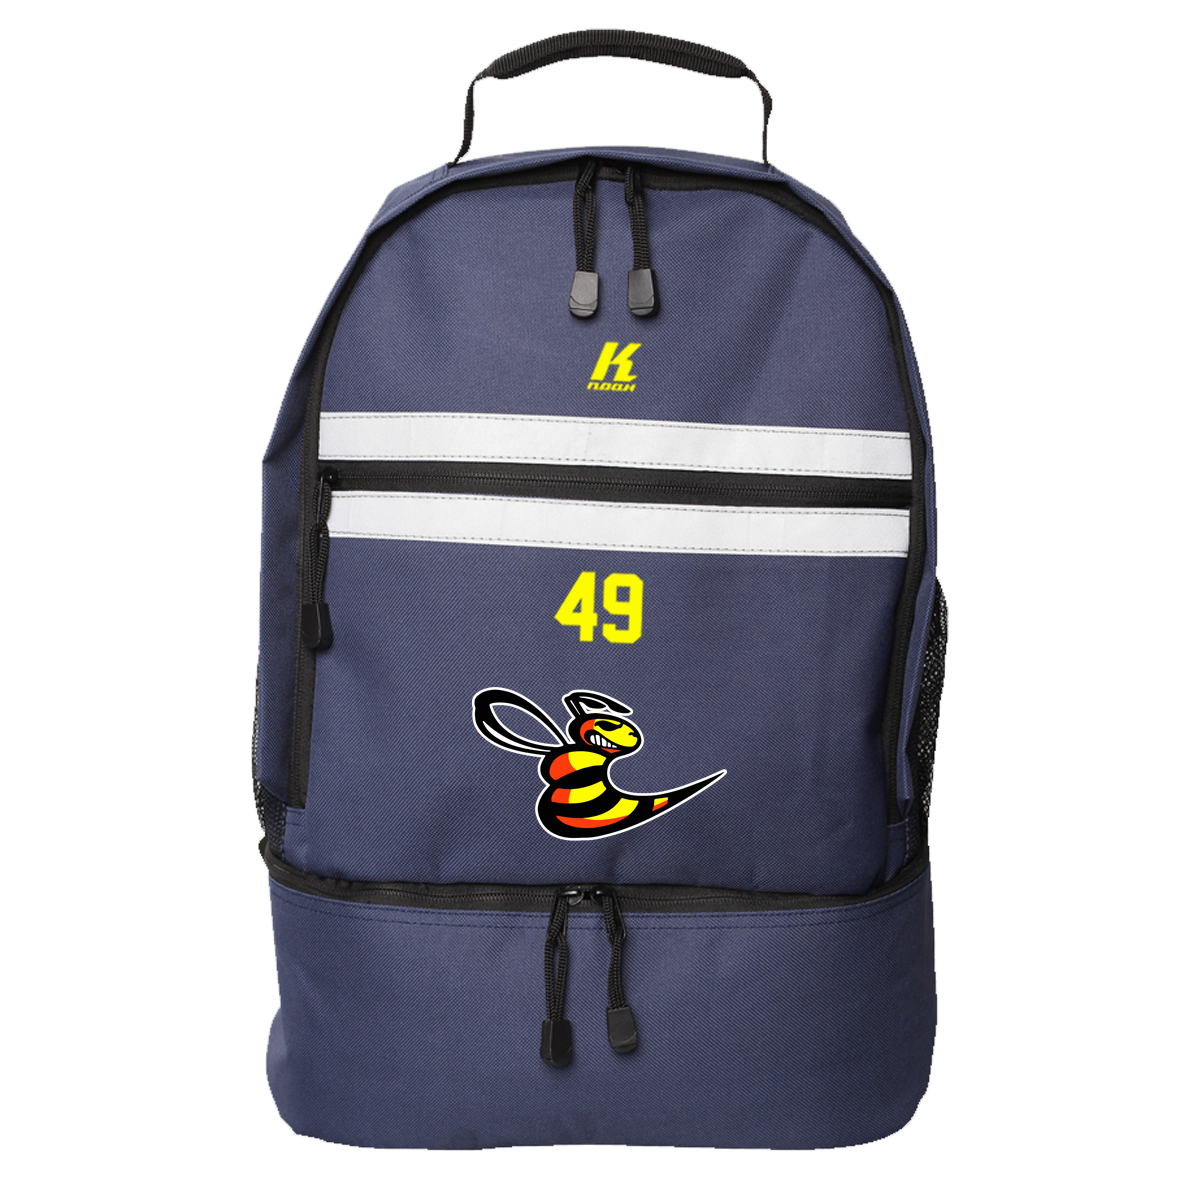 Hornets Players Backpack with Playernumber or Initials